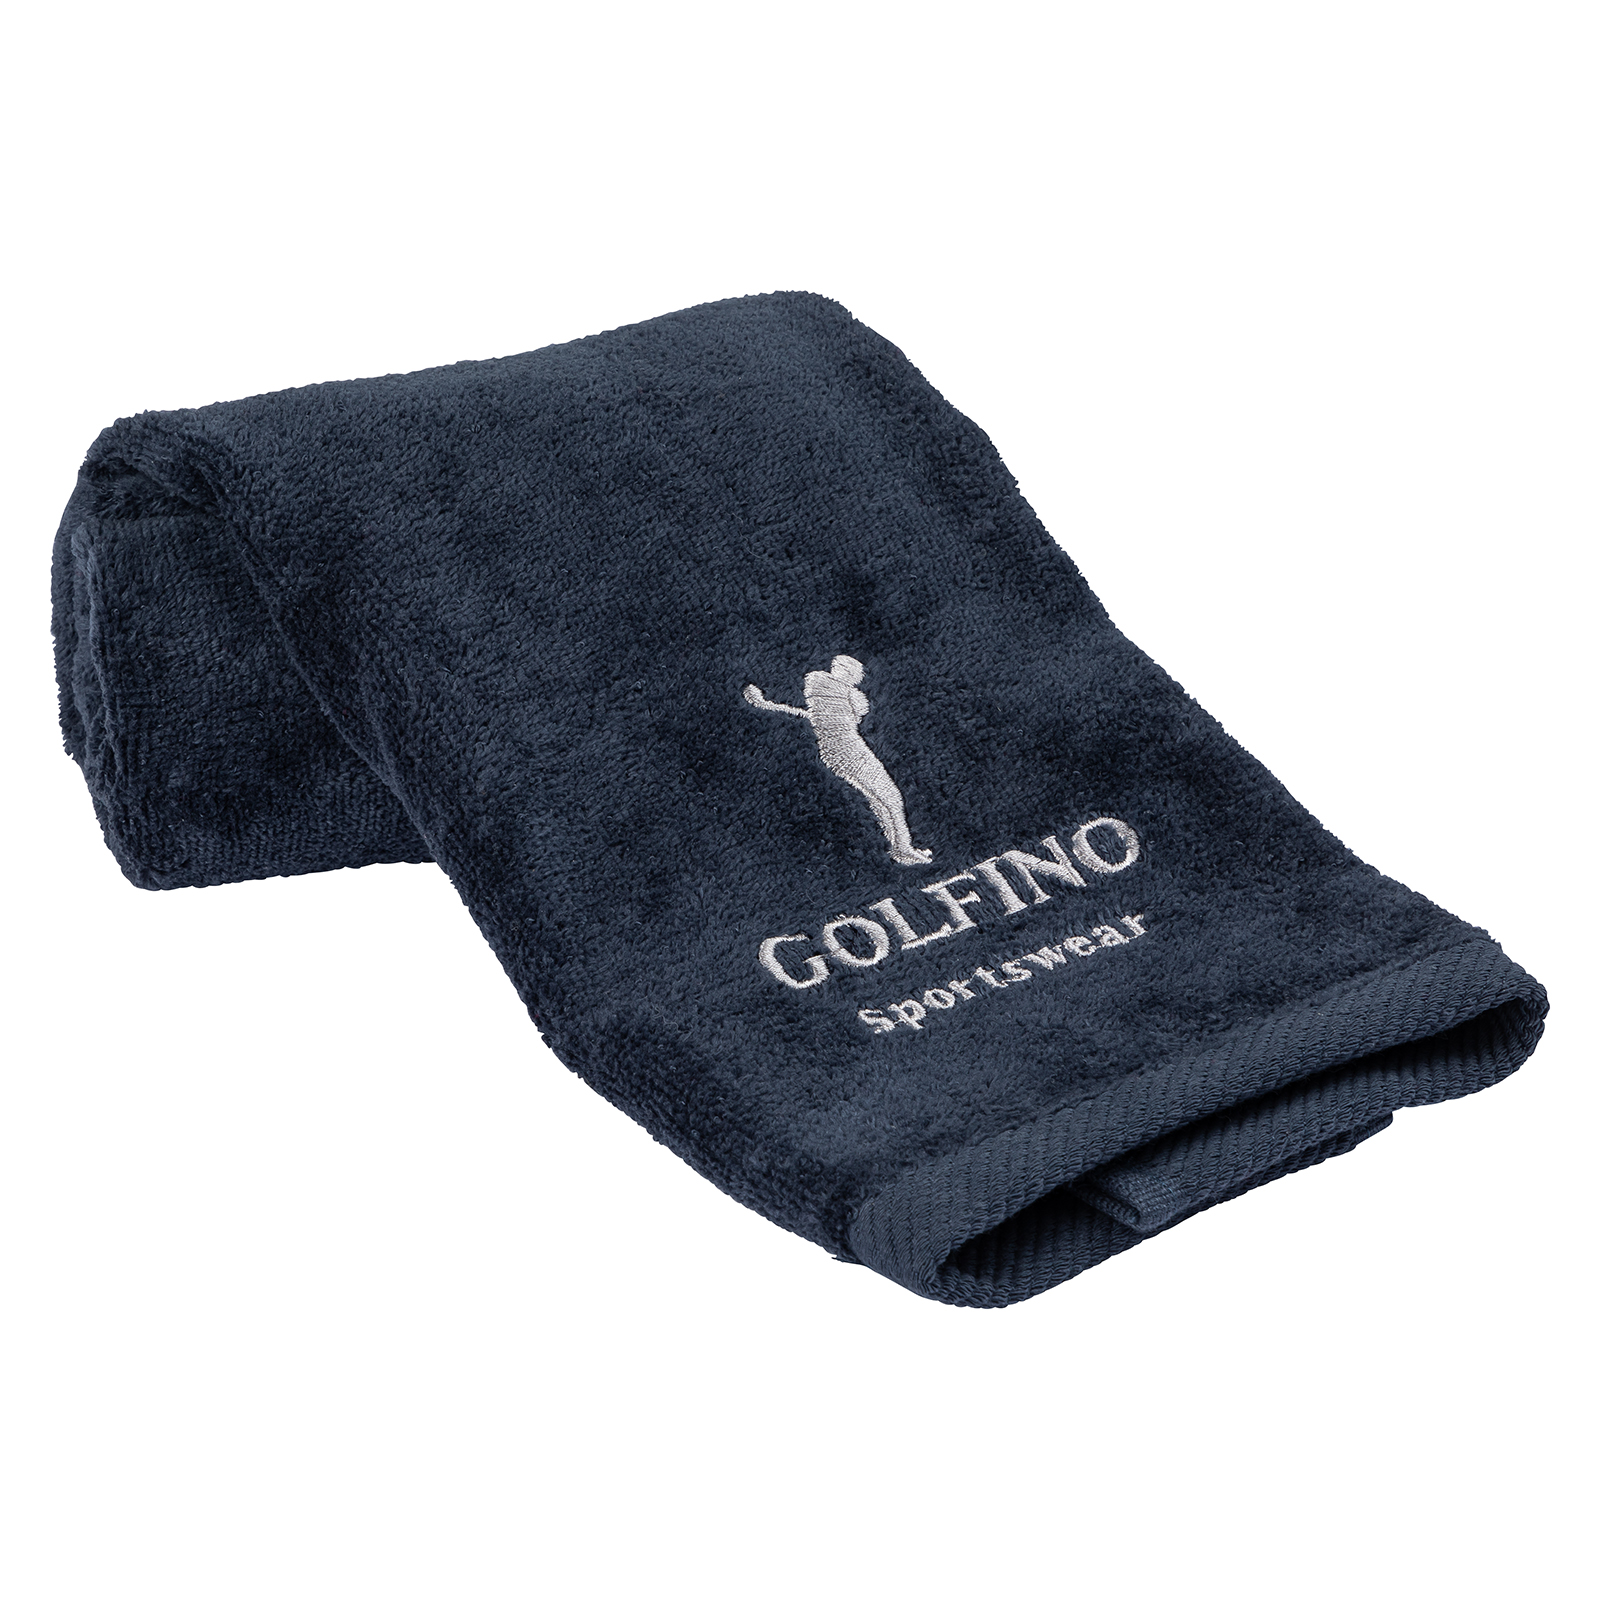 Absorbent golf towel for clubs and equipment